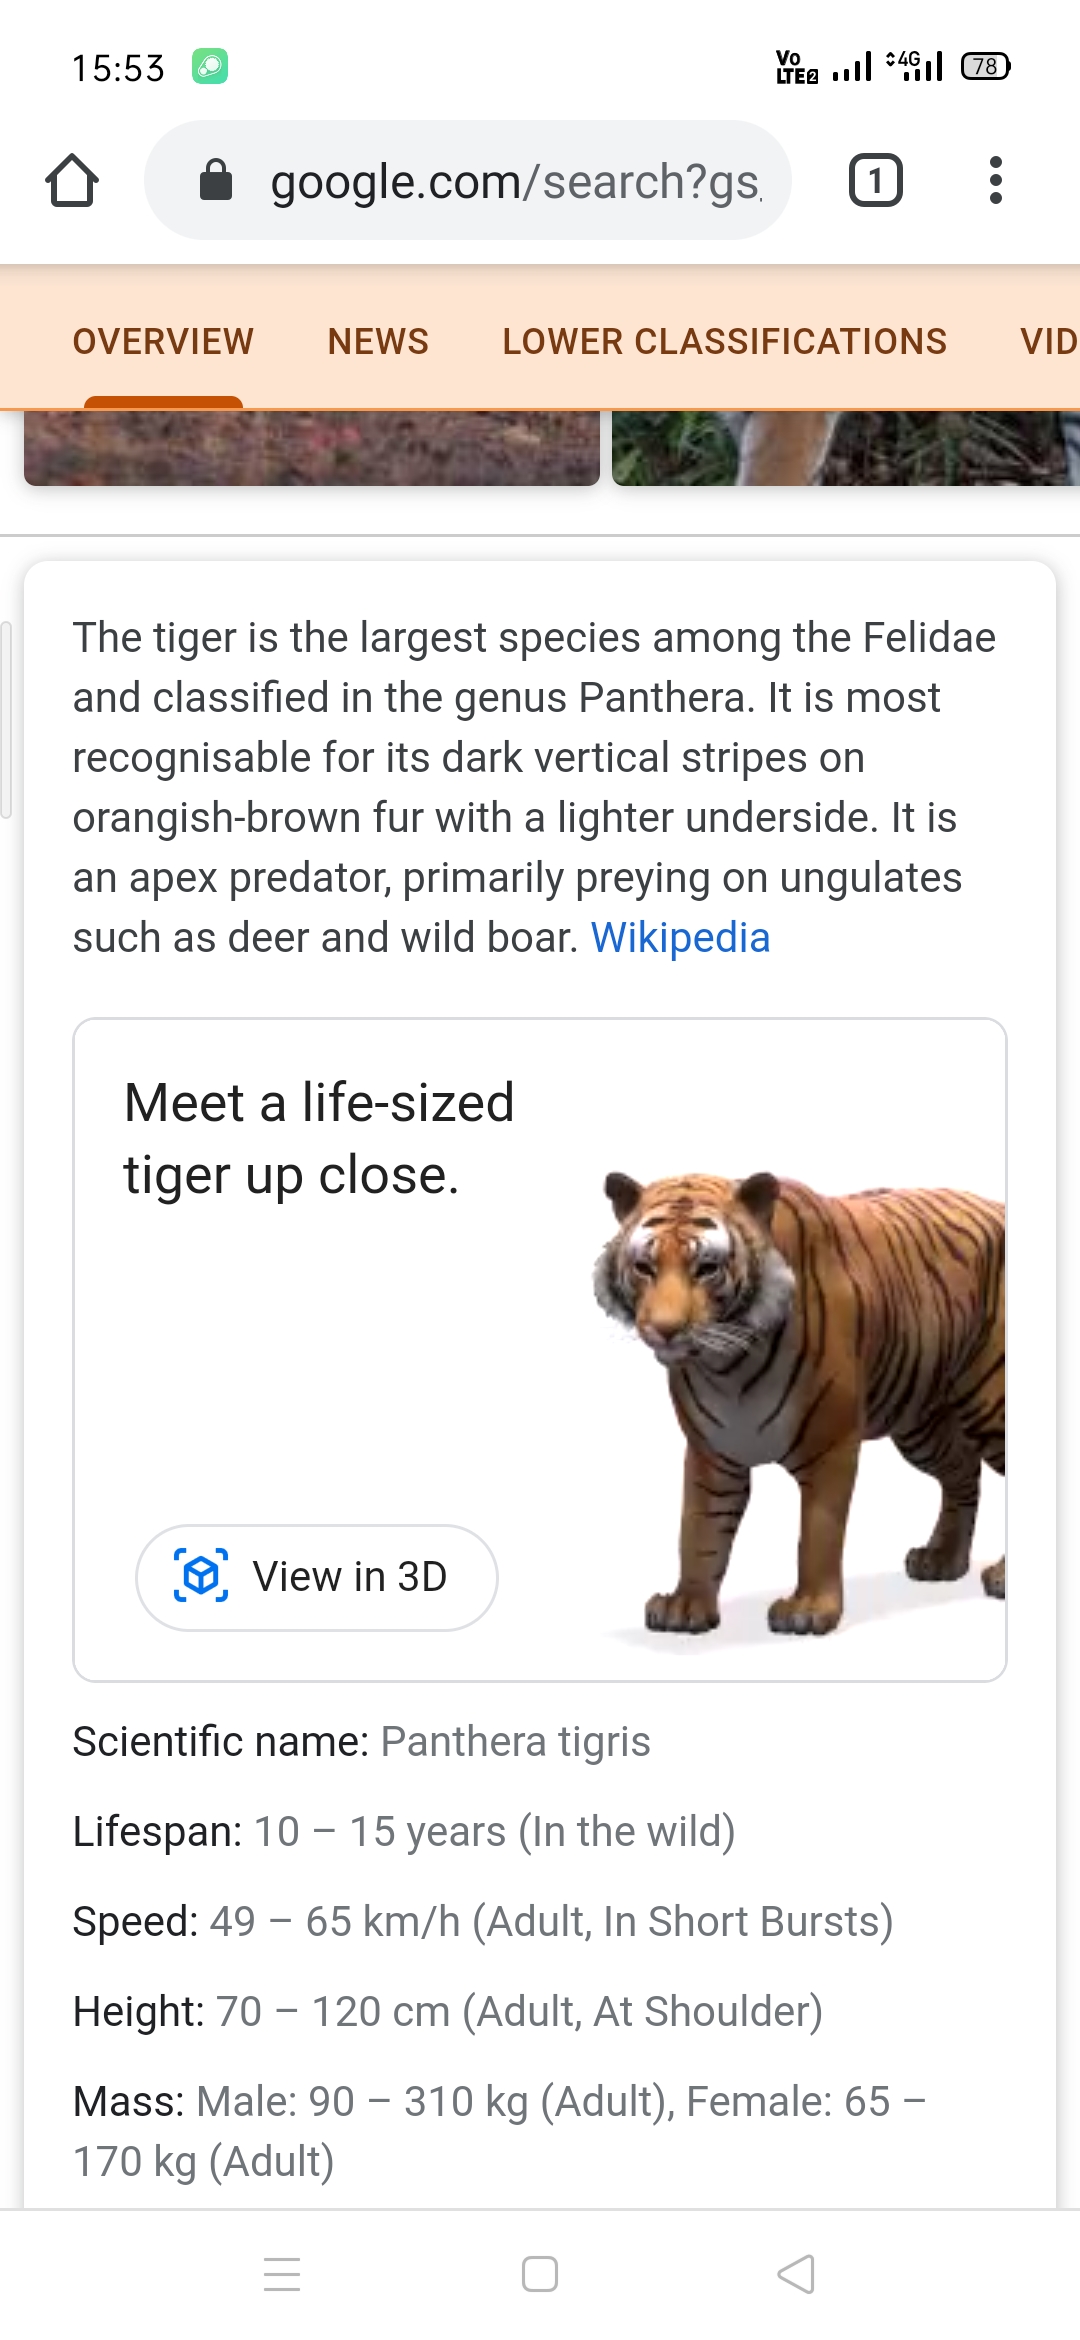 Google 3d Animals How To Watch Tiger Panda Dog And More Animals In 3d In Your Room